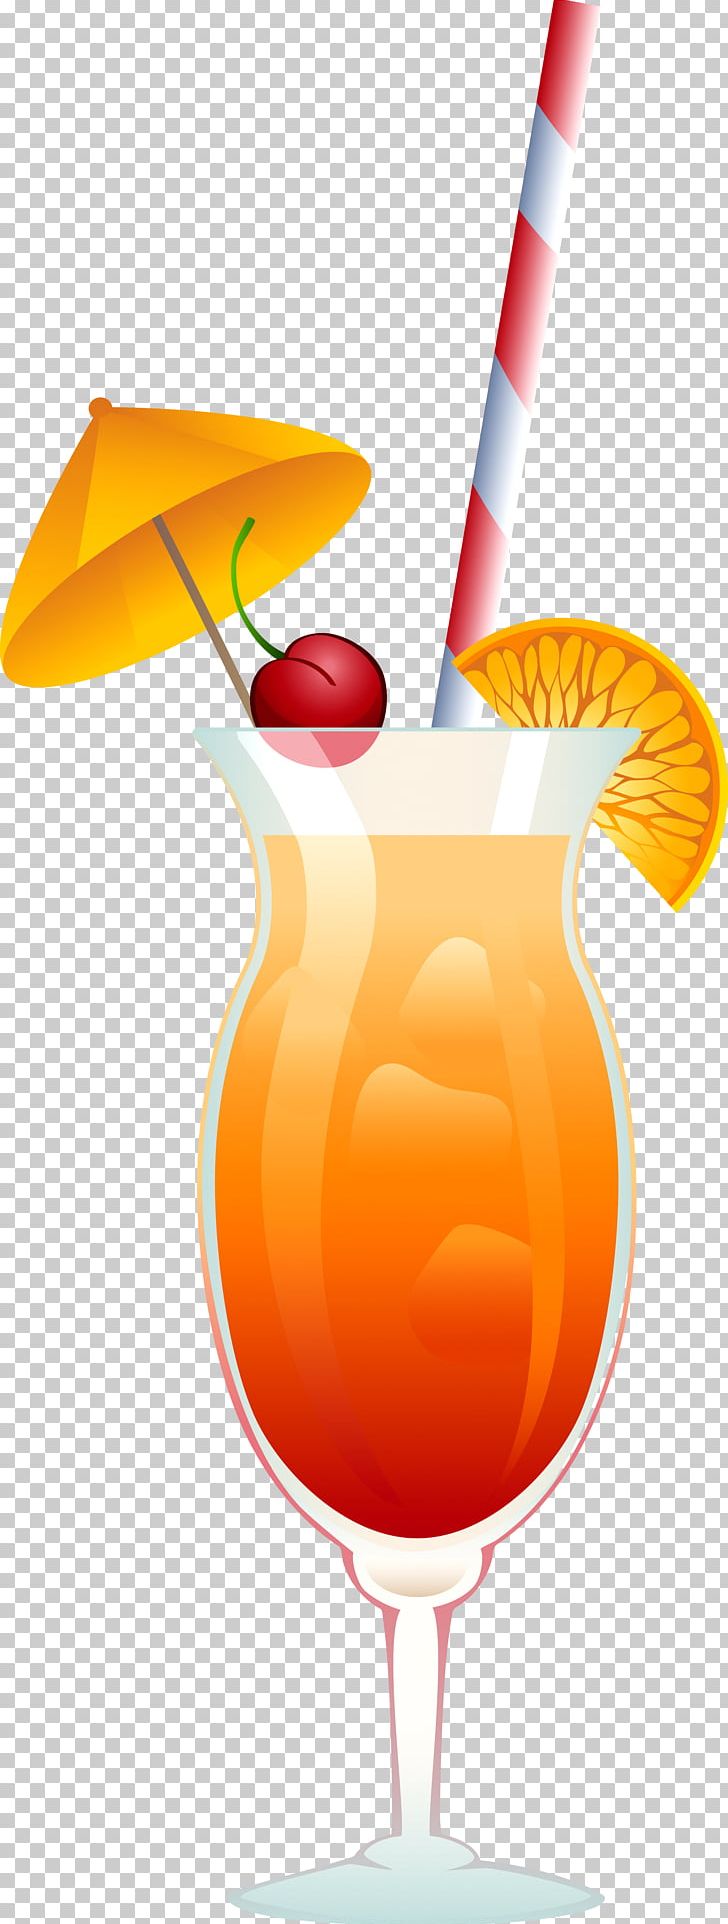 Wine Cocktail Sea Breeze Mai Tai PNG, Clipart, Cartoon Cocktail, Cocktail, Cocktail Fruit, Cocktail Garnish, Cocktail Glass Free PNG Download